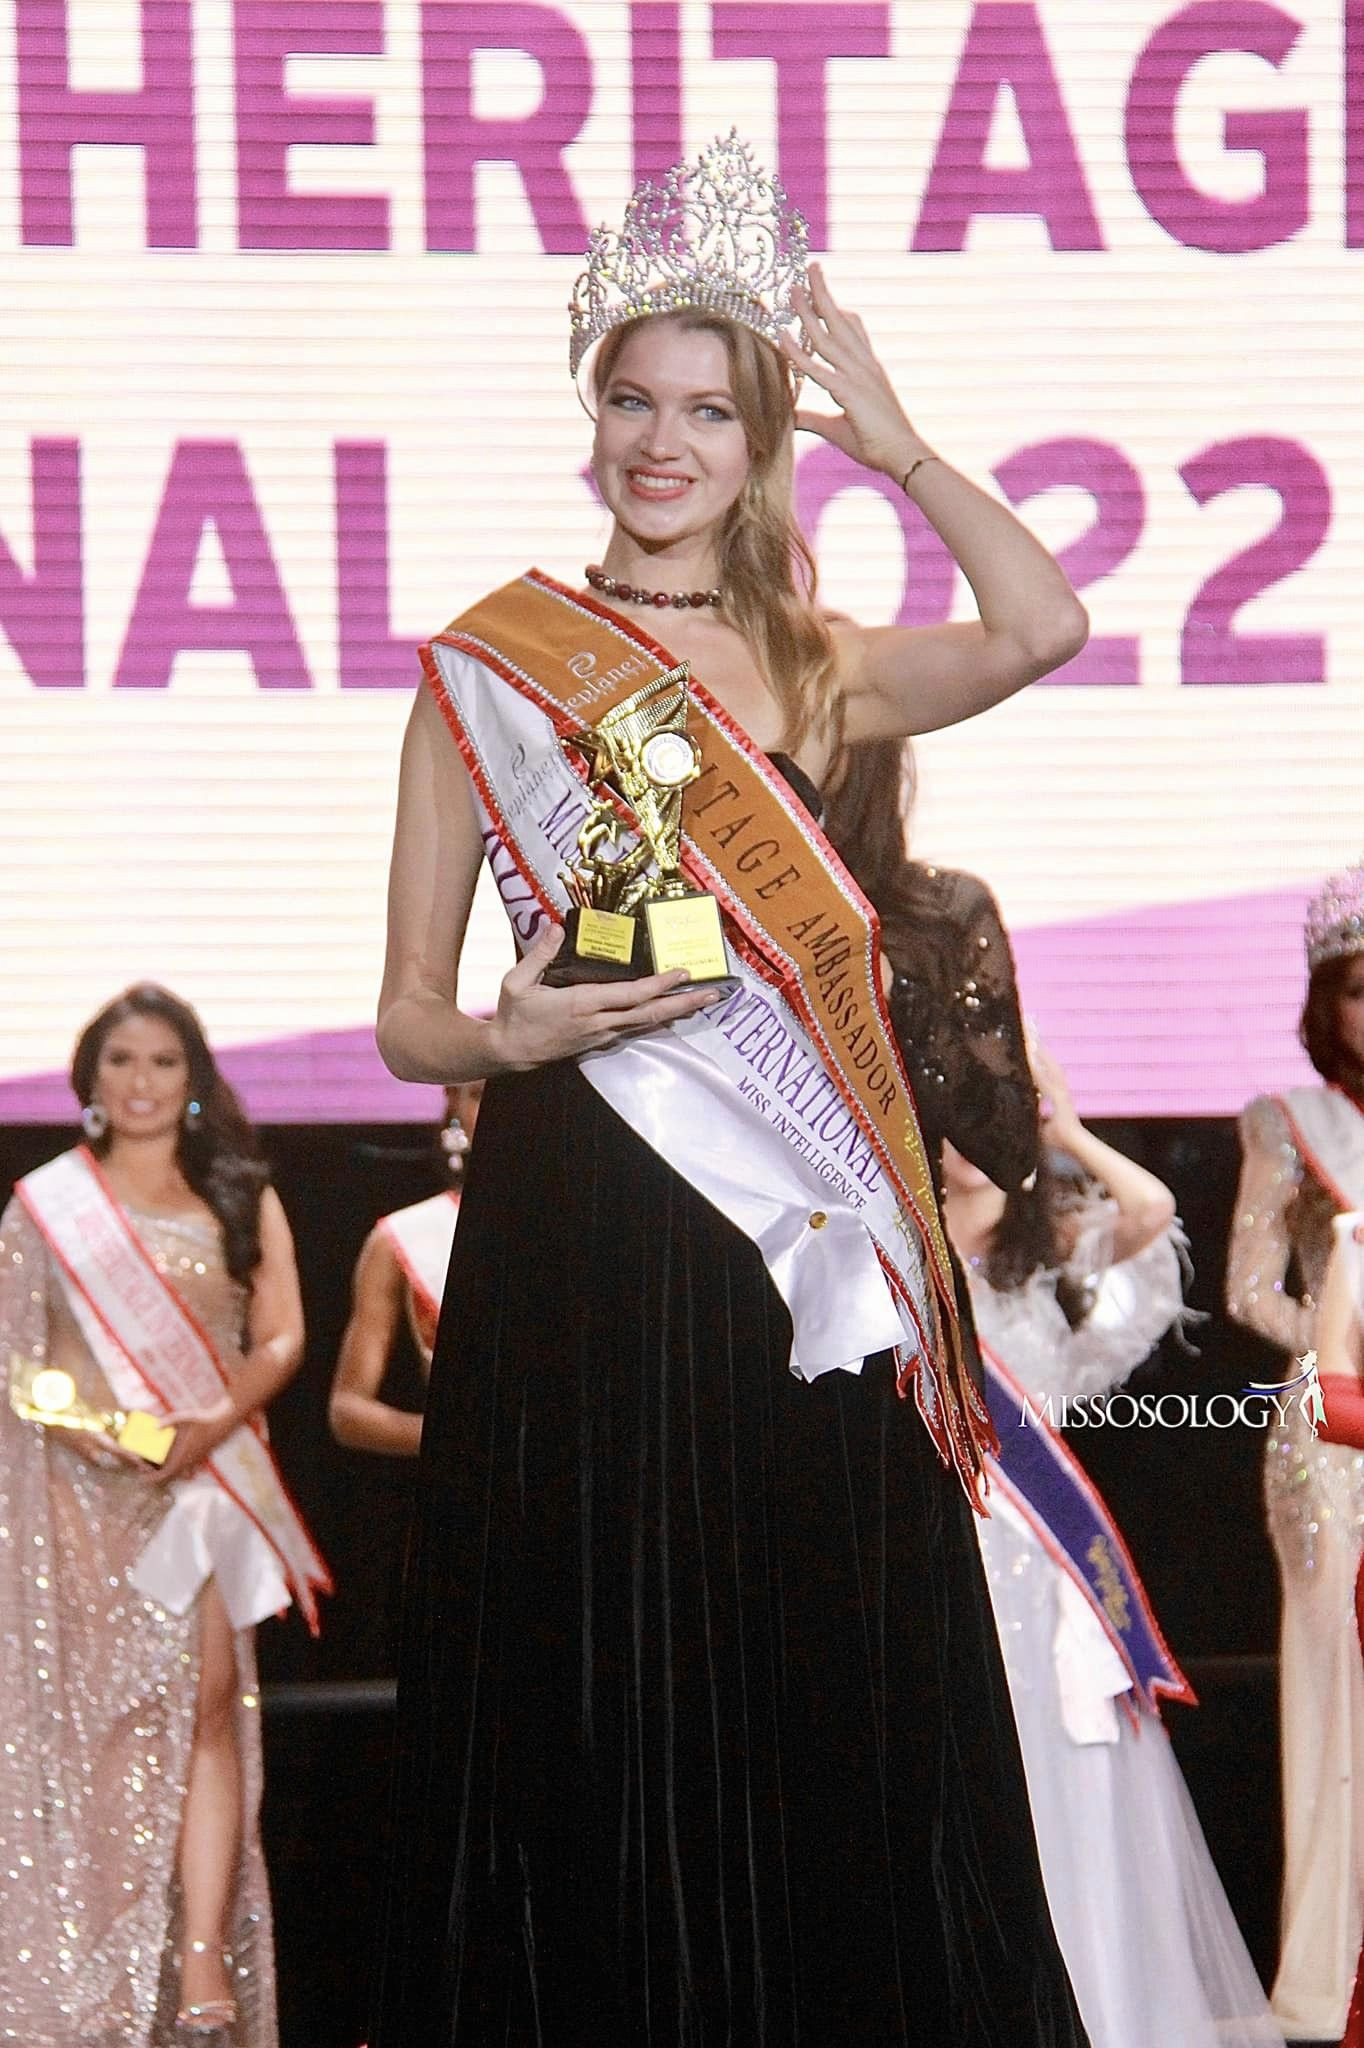 russia vence miss heritage international 2022. H9Dl7Xp